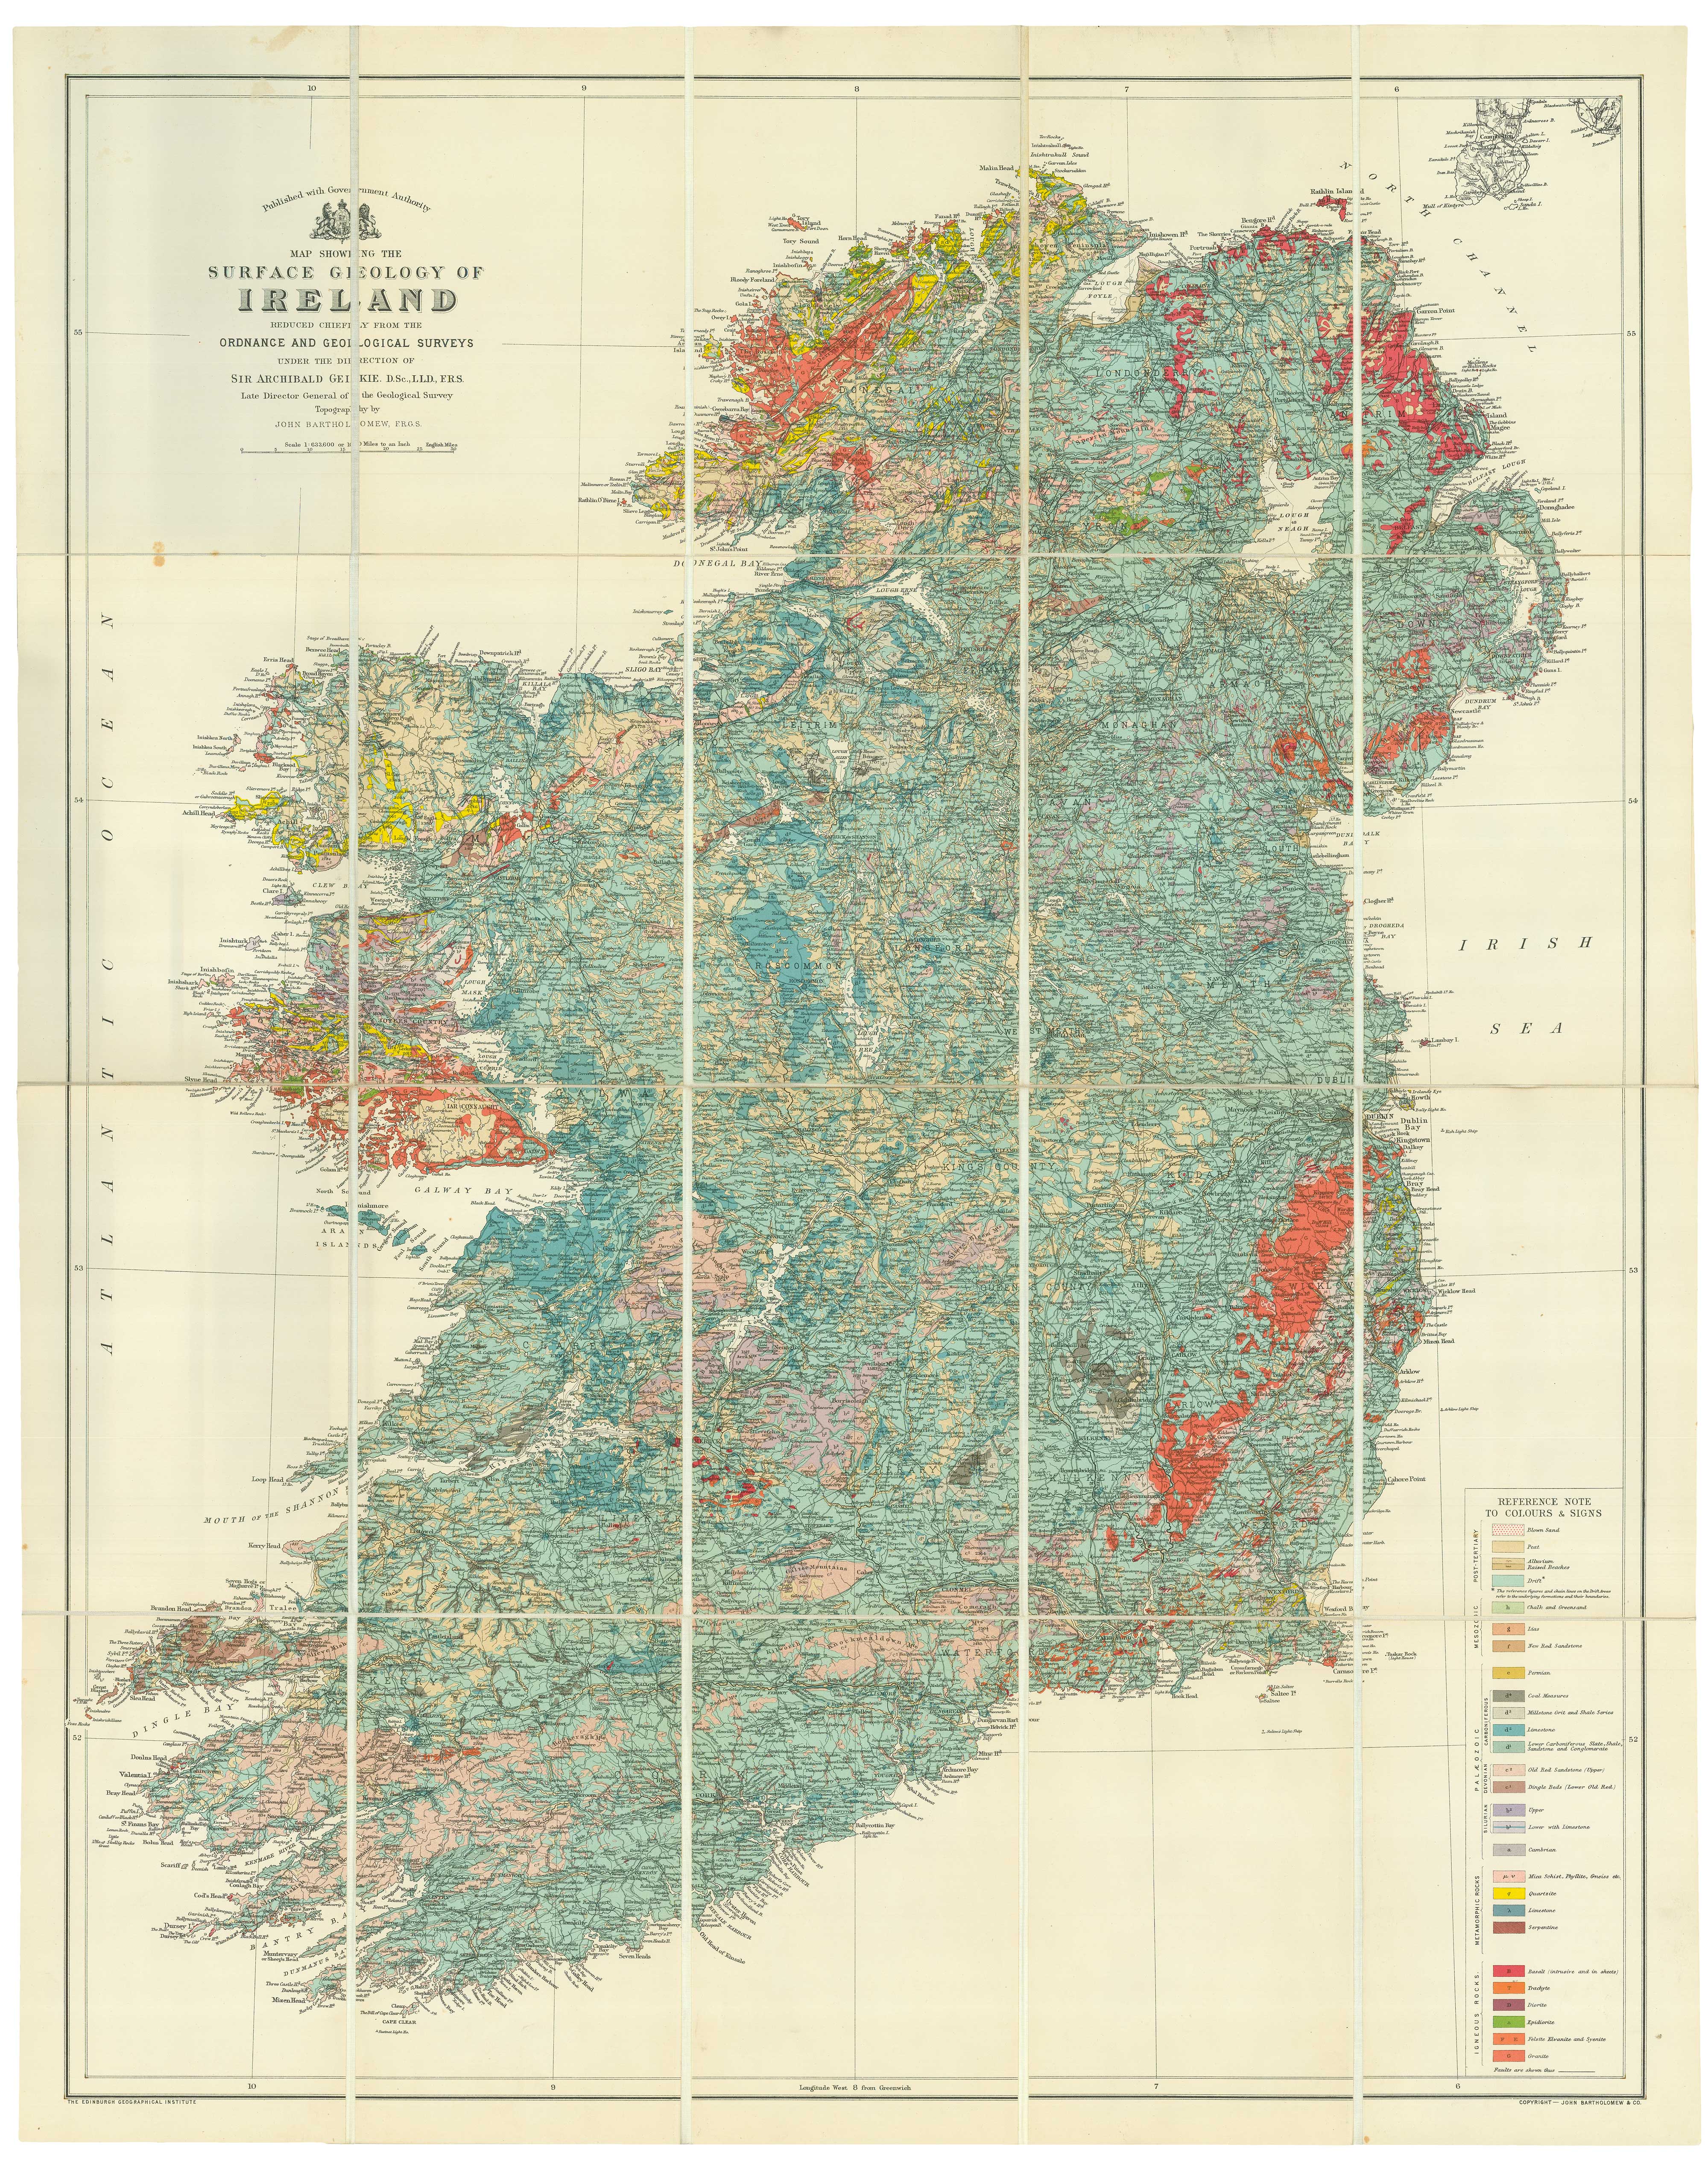 Map Showing the Surface Geology of Ireland Reduced chiefly from the Ordnance and Geological Surveys of Sir Archibald Geikie